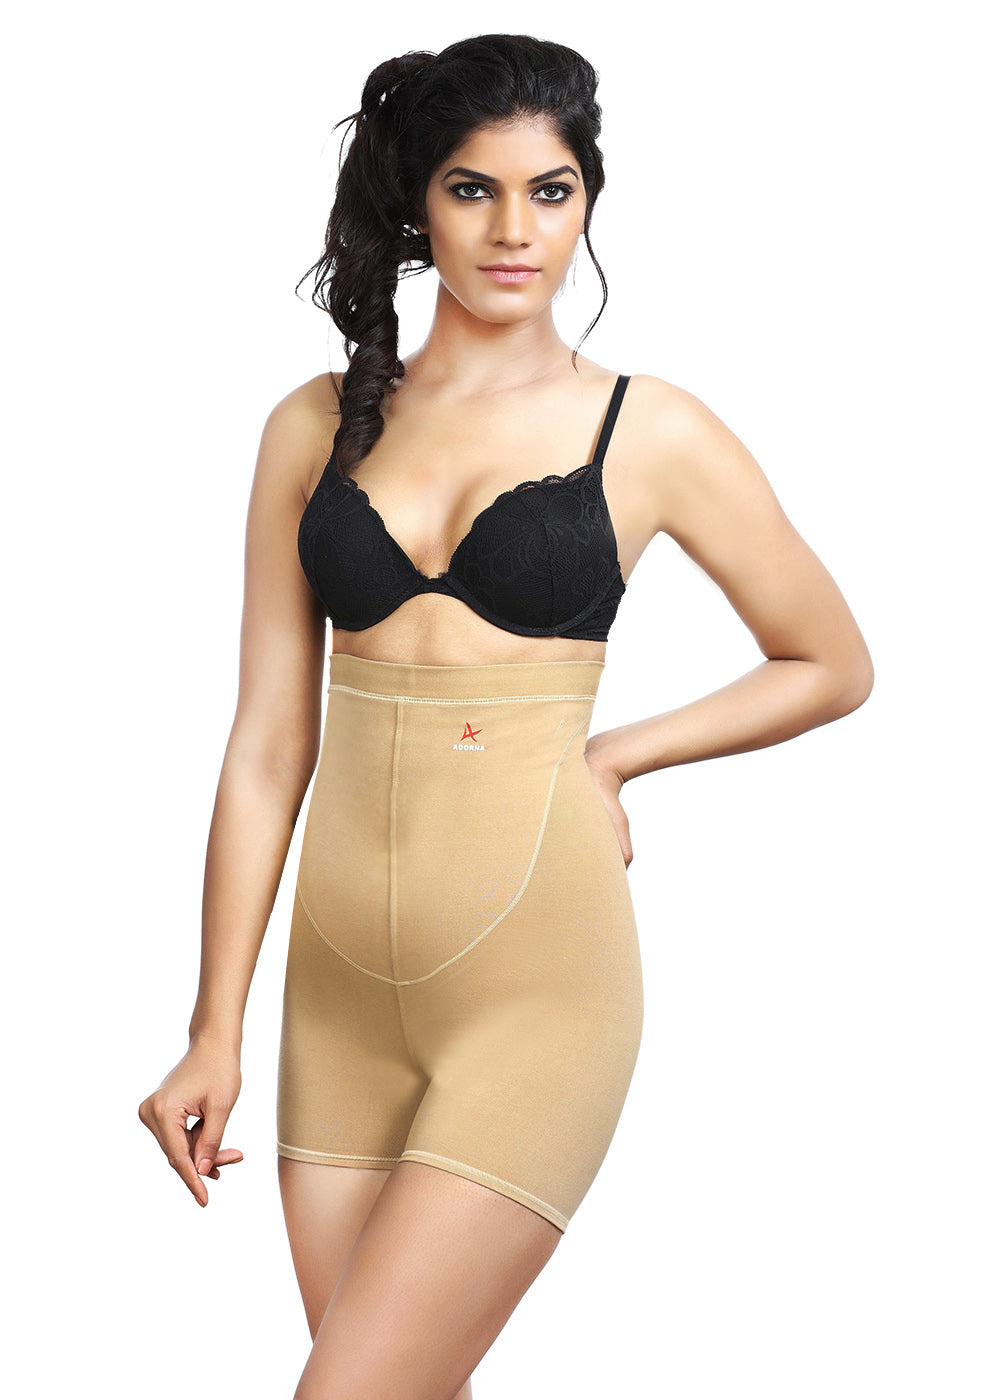 SKIMS Maternity Sculpting High Waist Brief Shapewear in Umber Size S/M